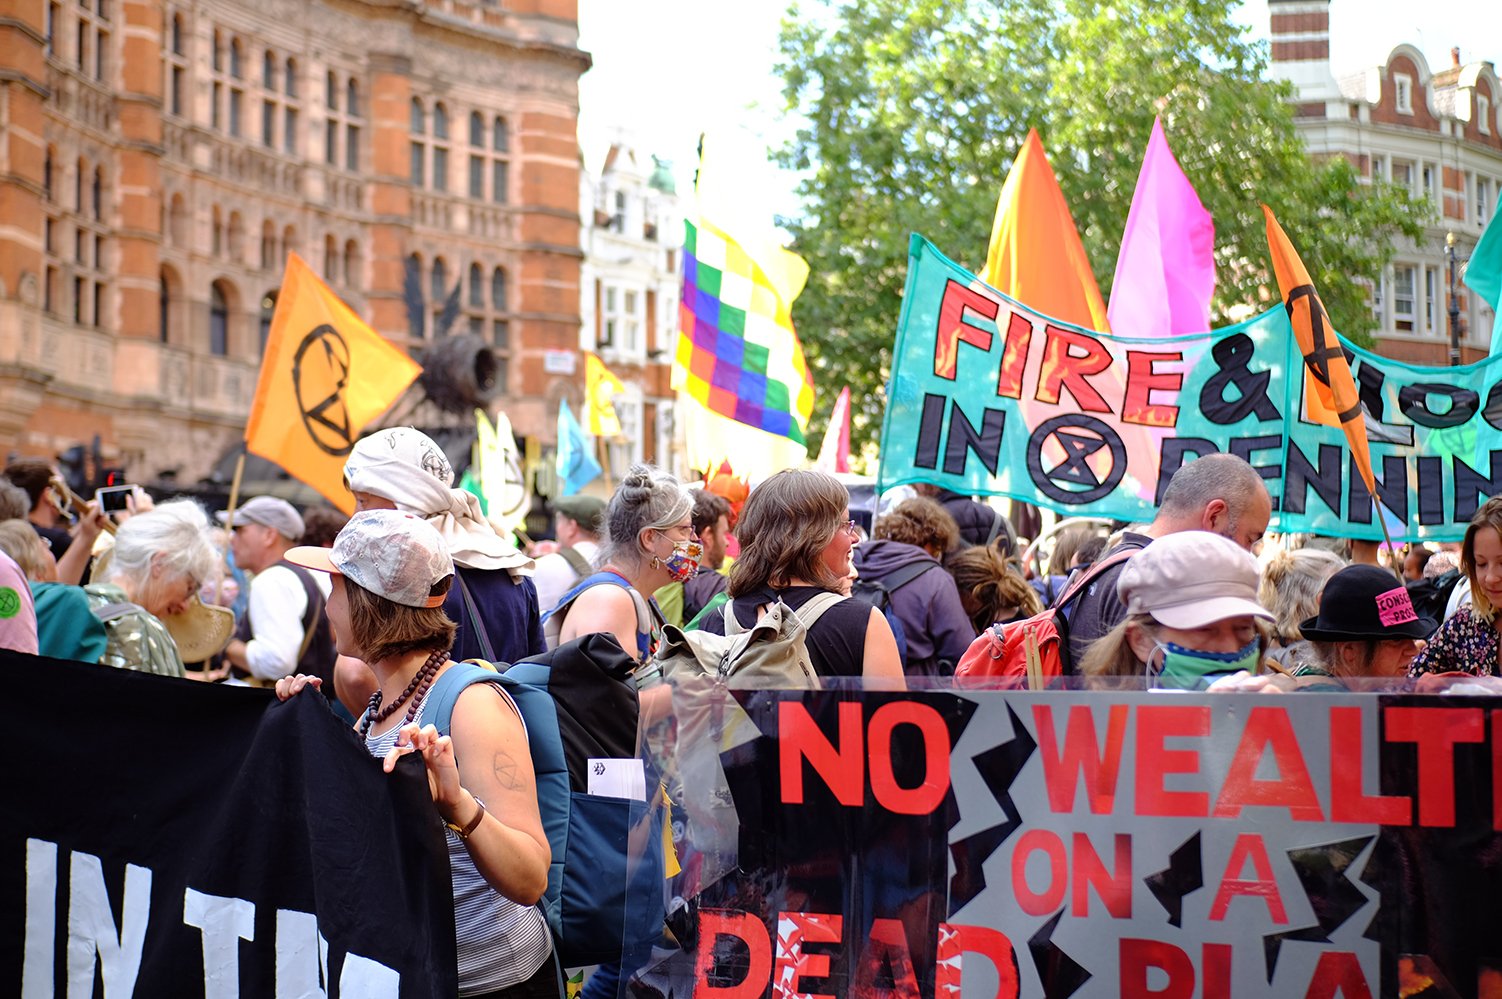 Extinction Rebellion demonstration with colourfull signs and flags and people masking